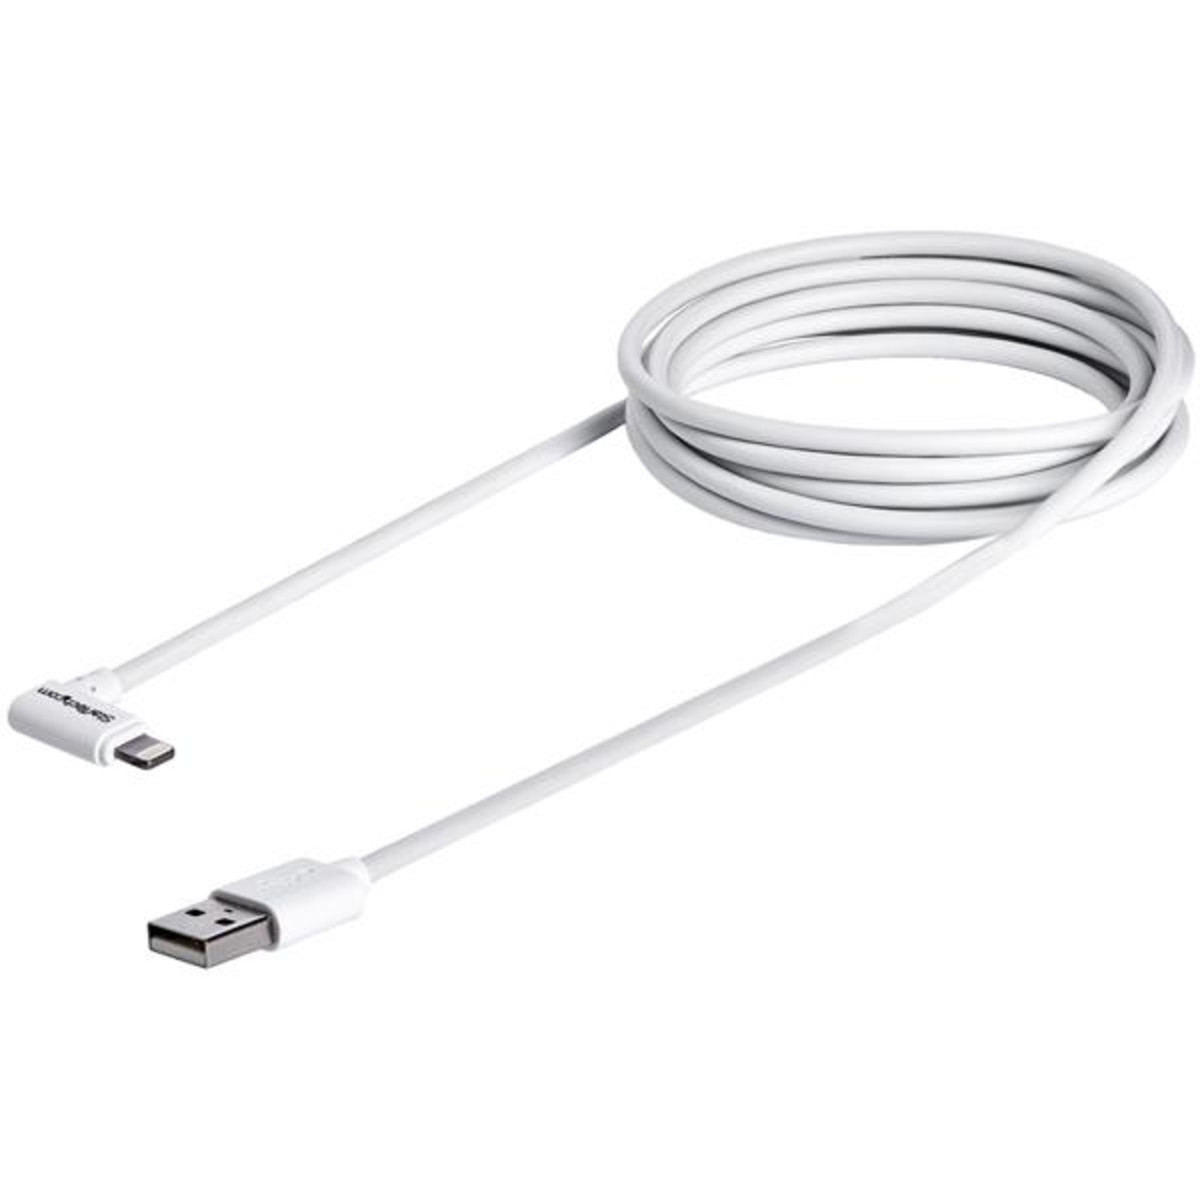 Angled Lightning to USB cable - 2m